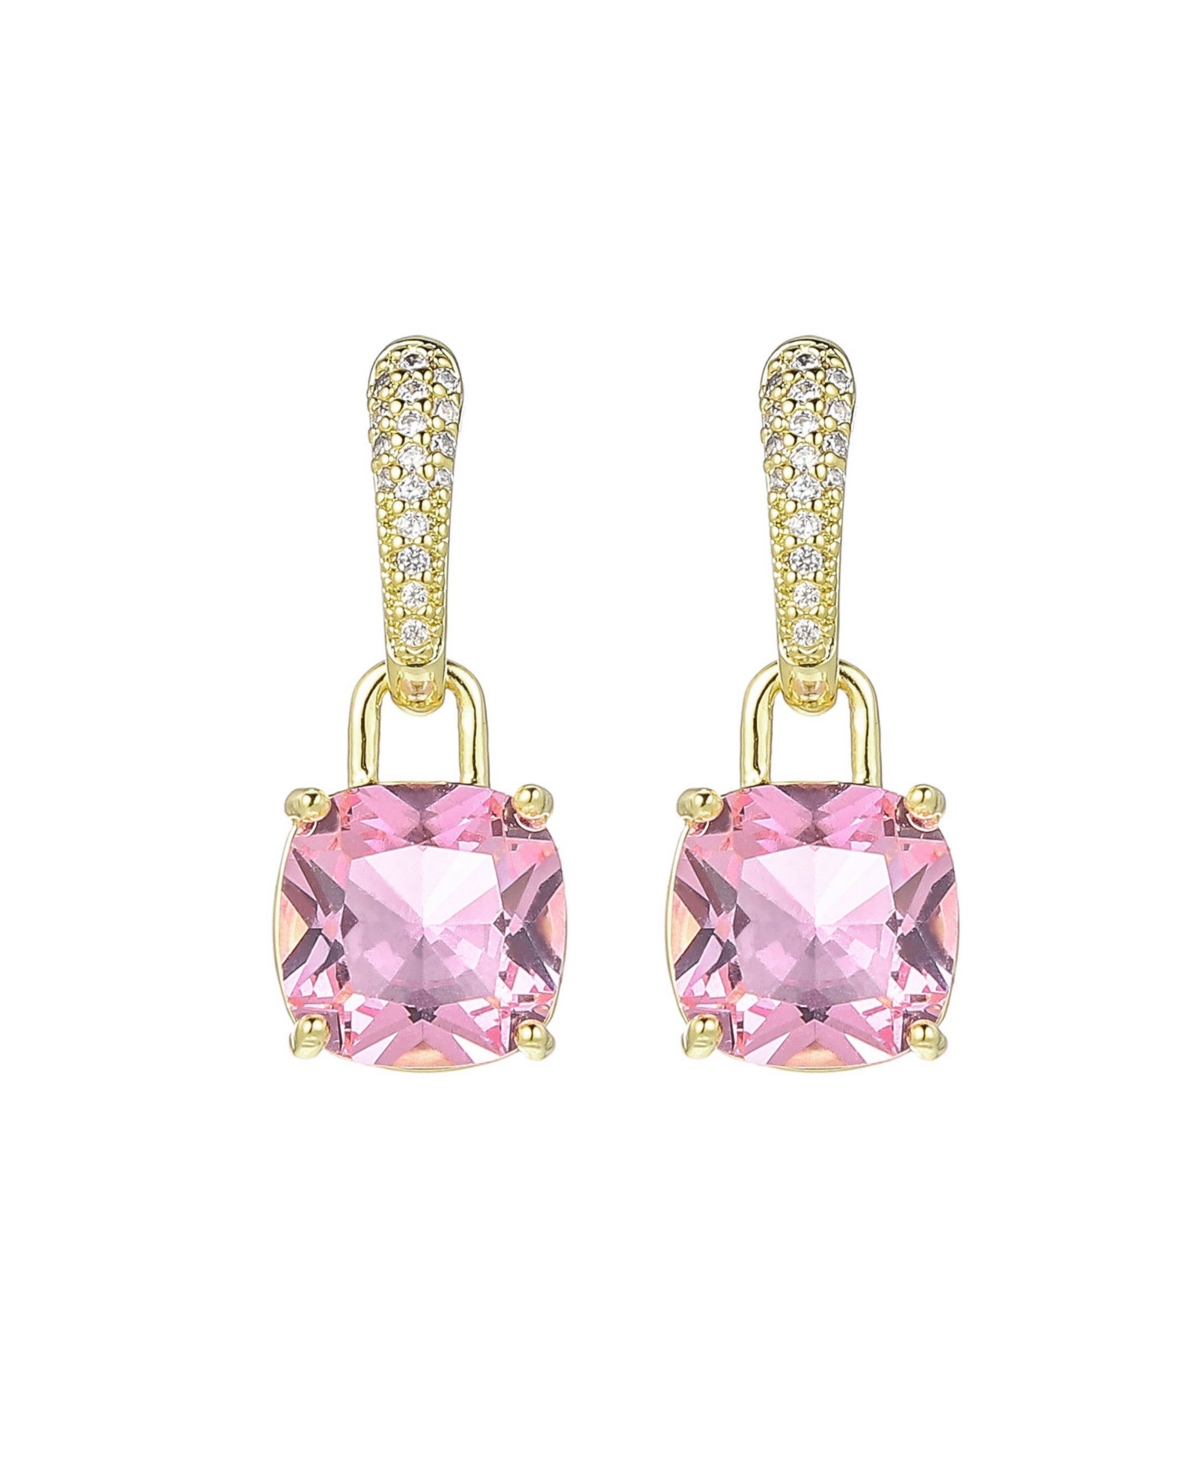 A & M Gold-Tone Pink Topaz Accent Earrings